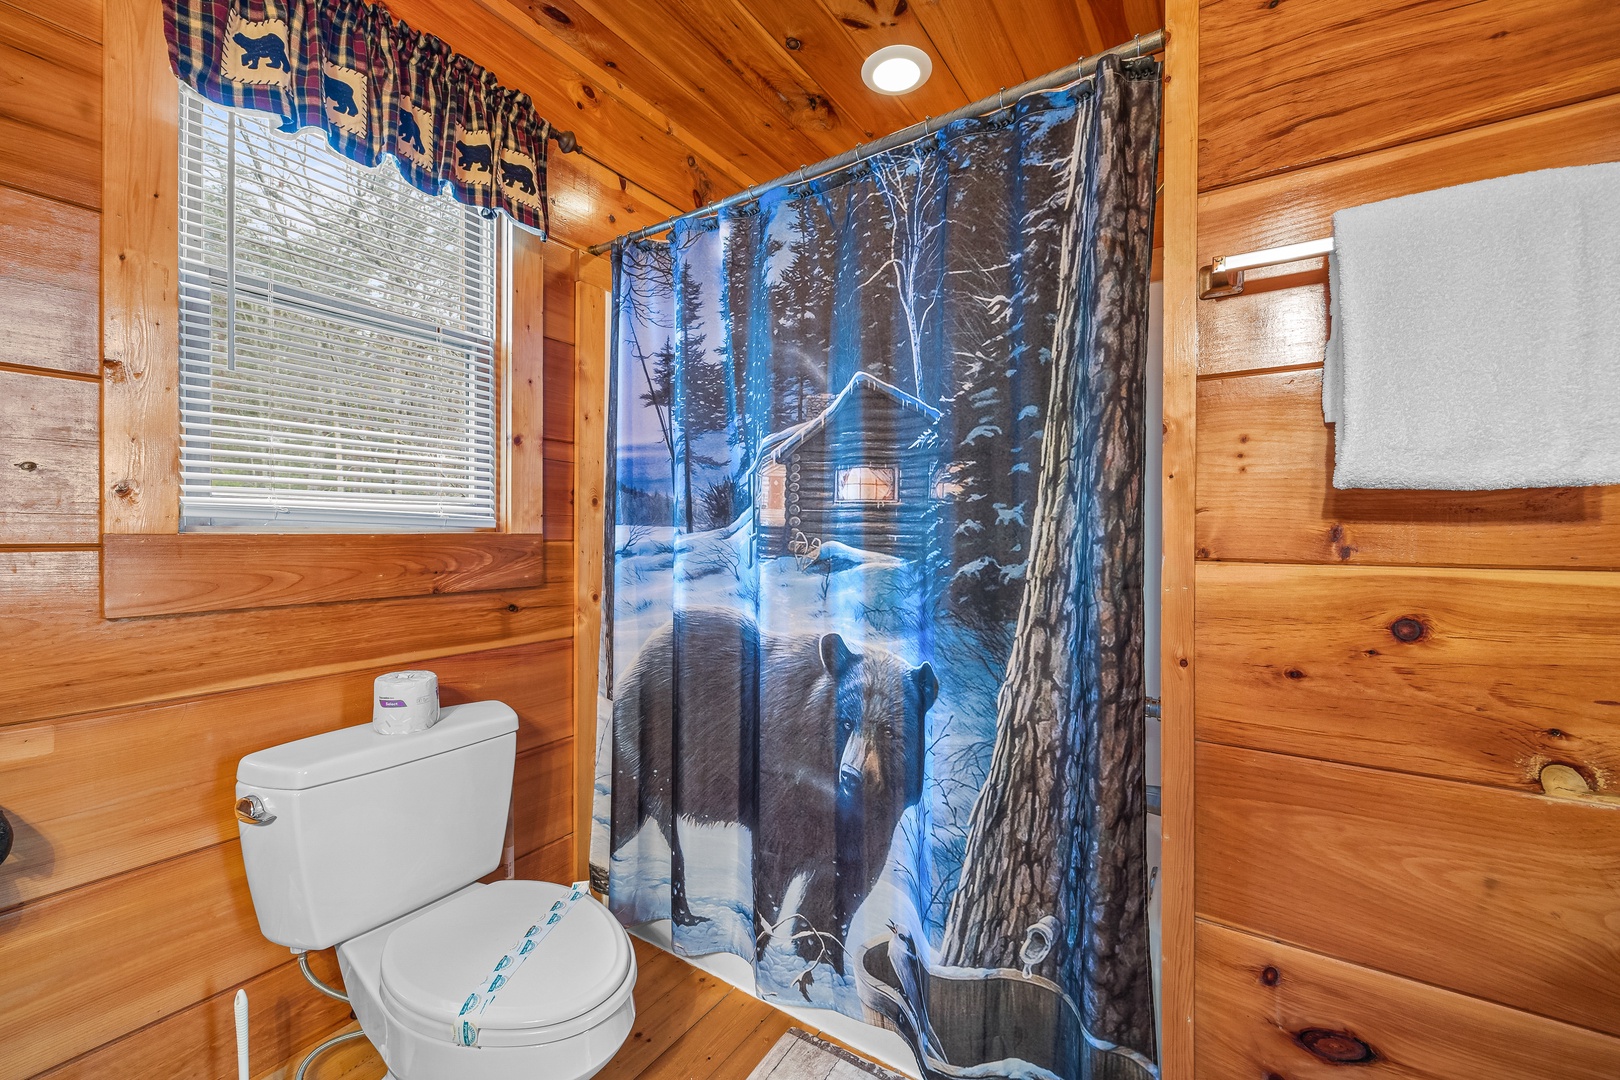 Bathroom with a tub and shower at Moonshine Memories, a 2 bedroom cabin rental located in Gatlinburg